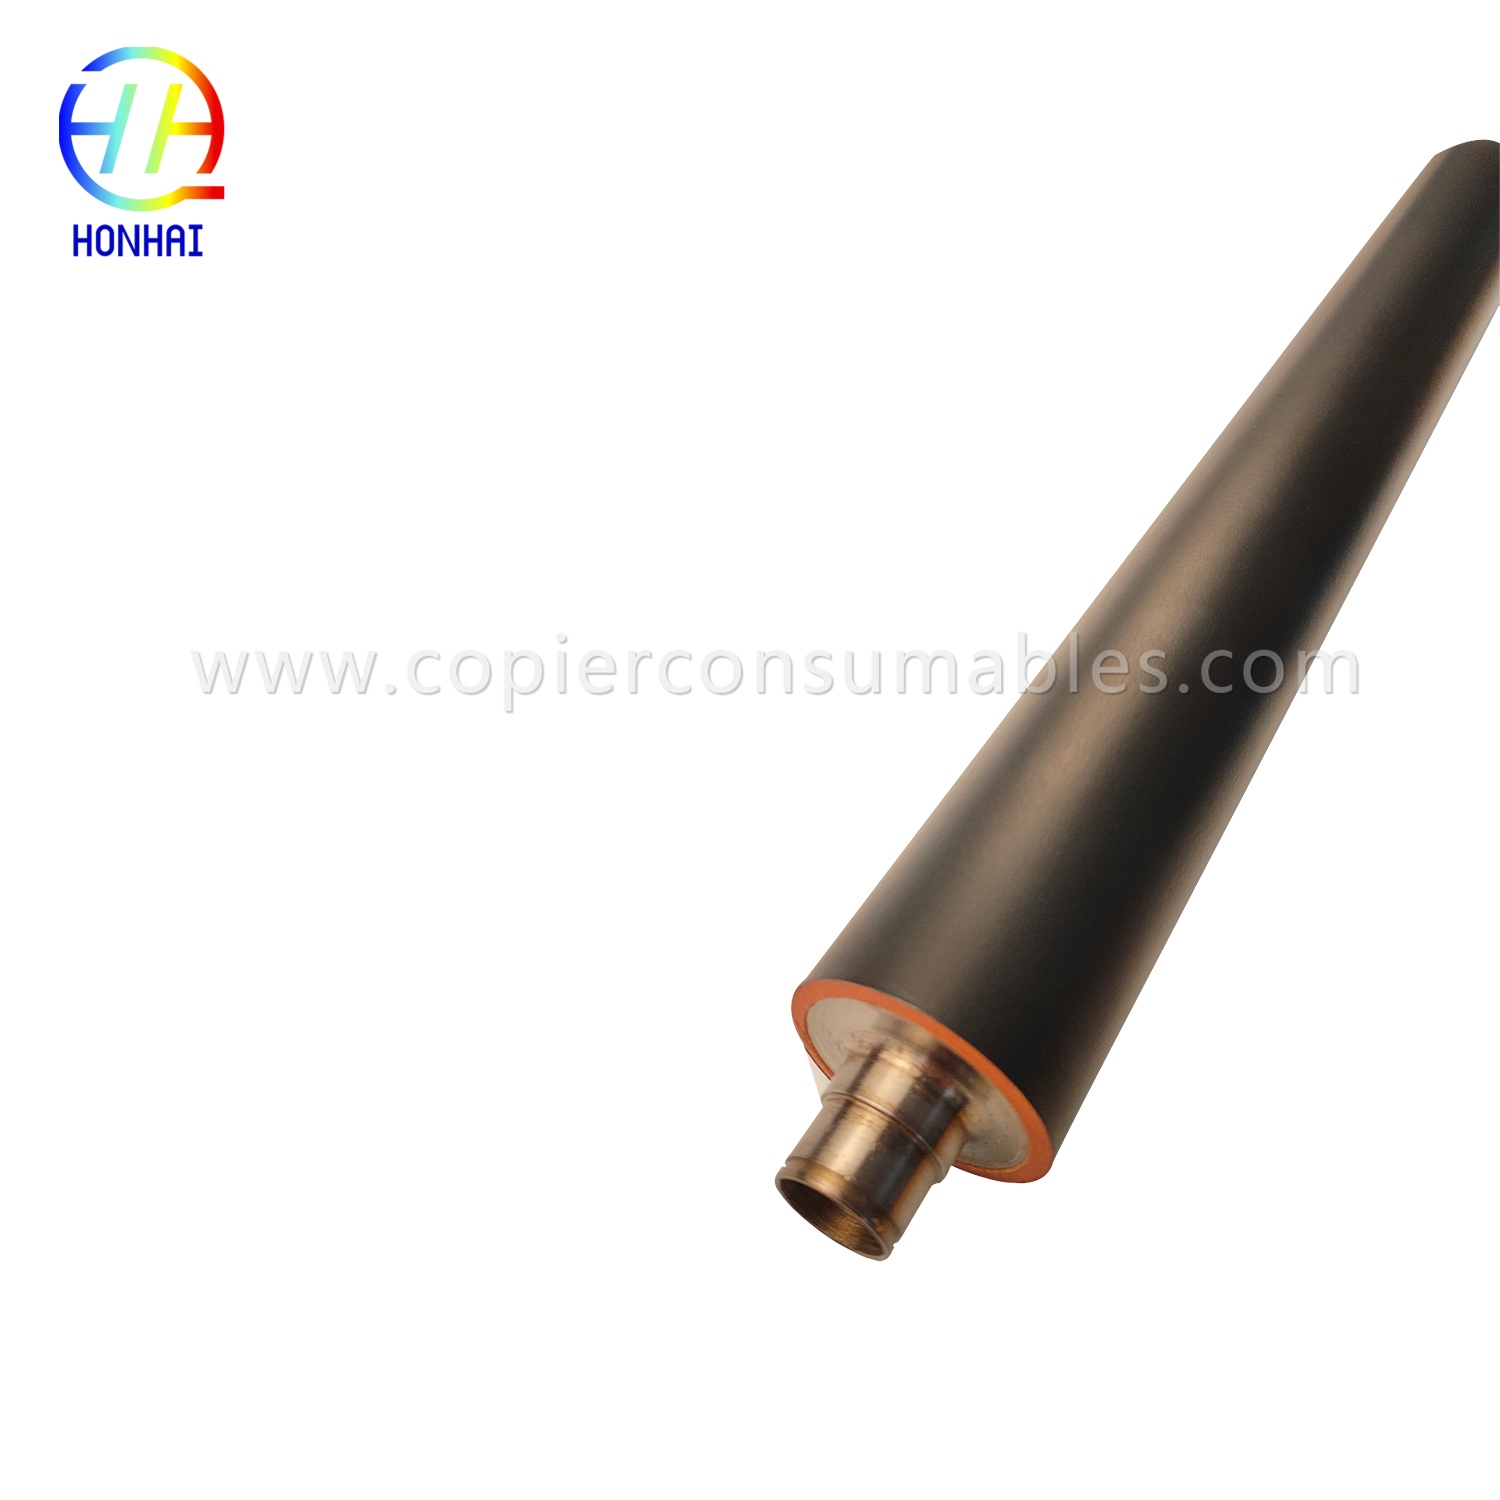 I-Pressure-Roller-For-Ricoh-Mpc4501-Mpc5501-Mp-C4501-C5501-Ae020183-Ae02-0183-Lower-Sleeved-Pressure-Roller(5) 拷贝